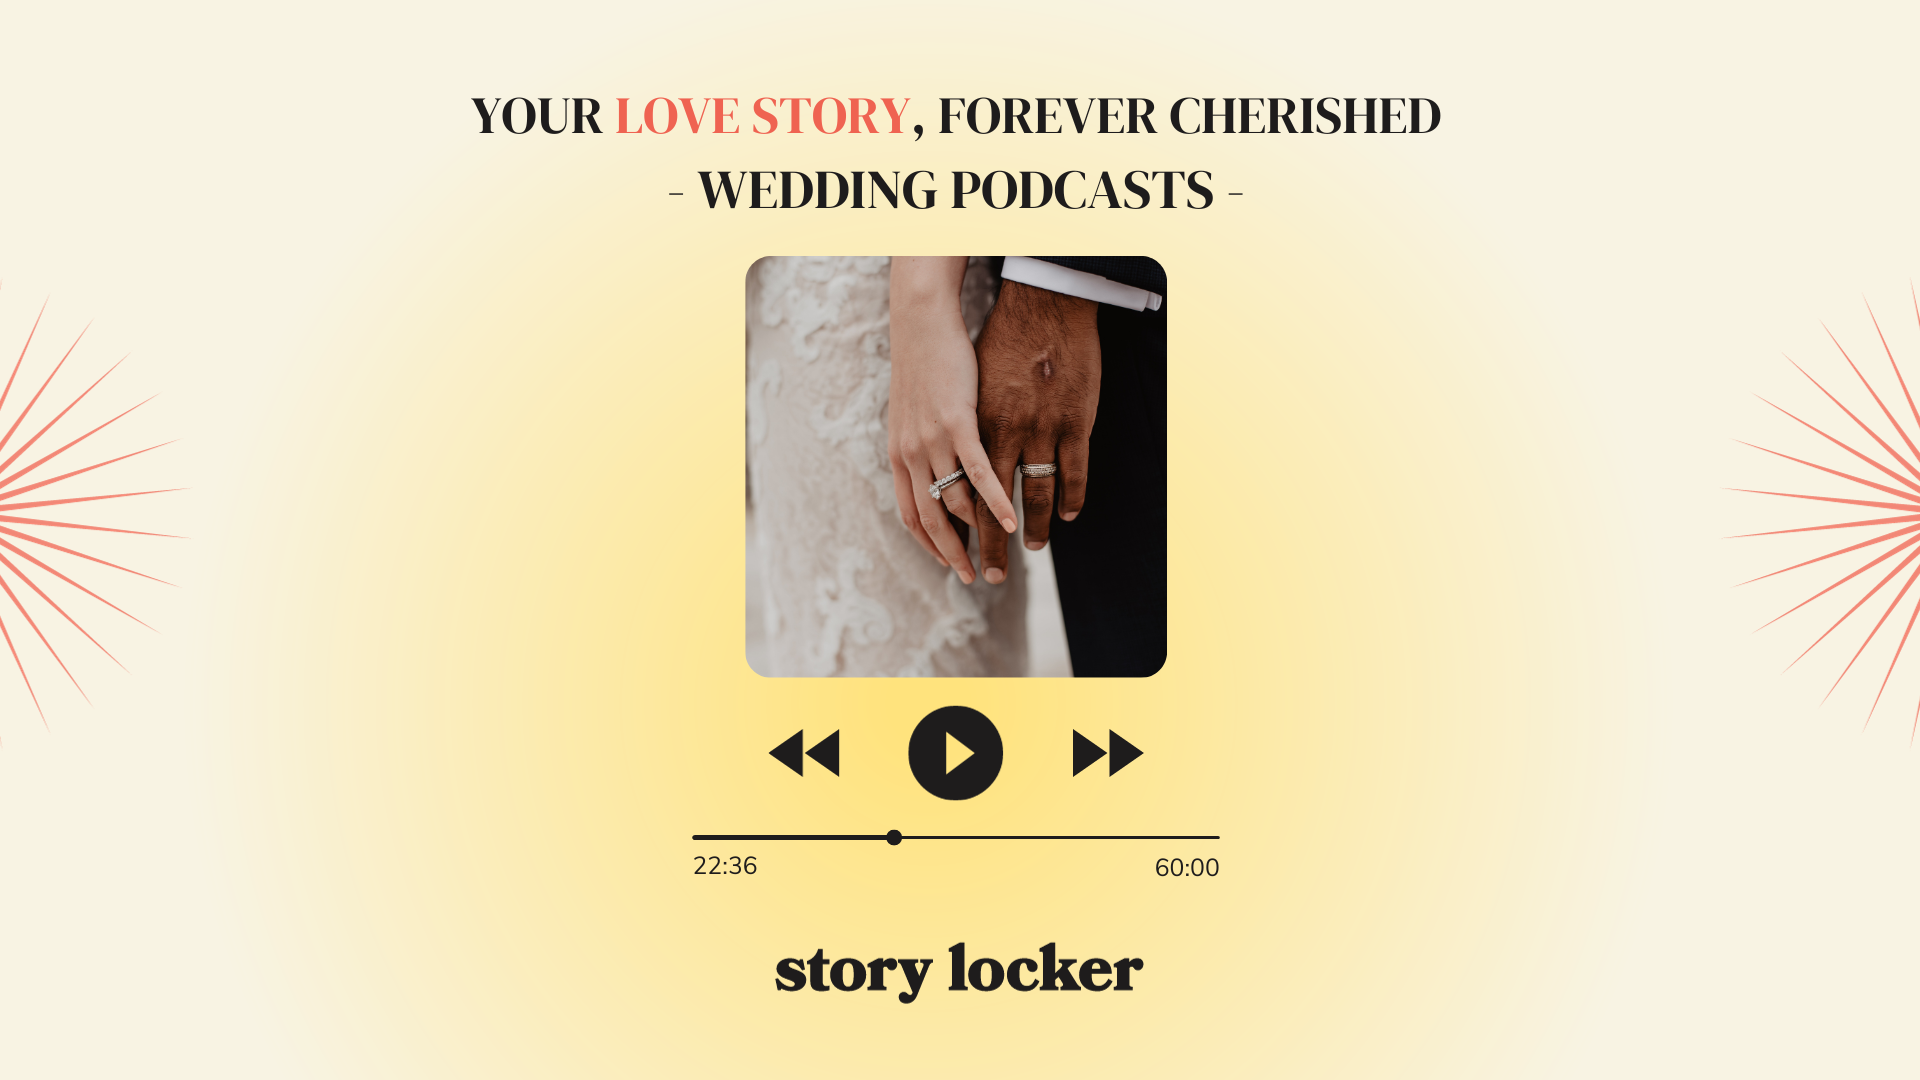  An image of the wedding podcast playing on a device. 